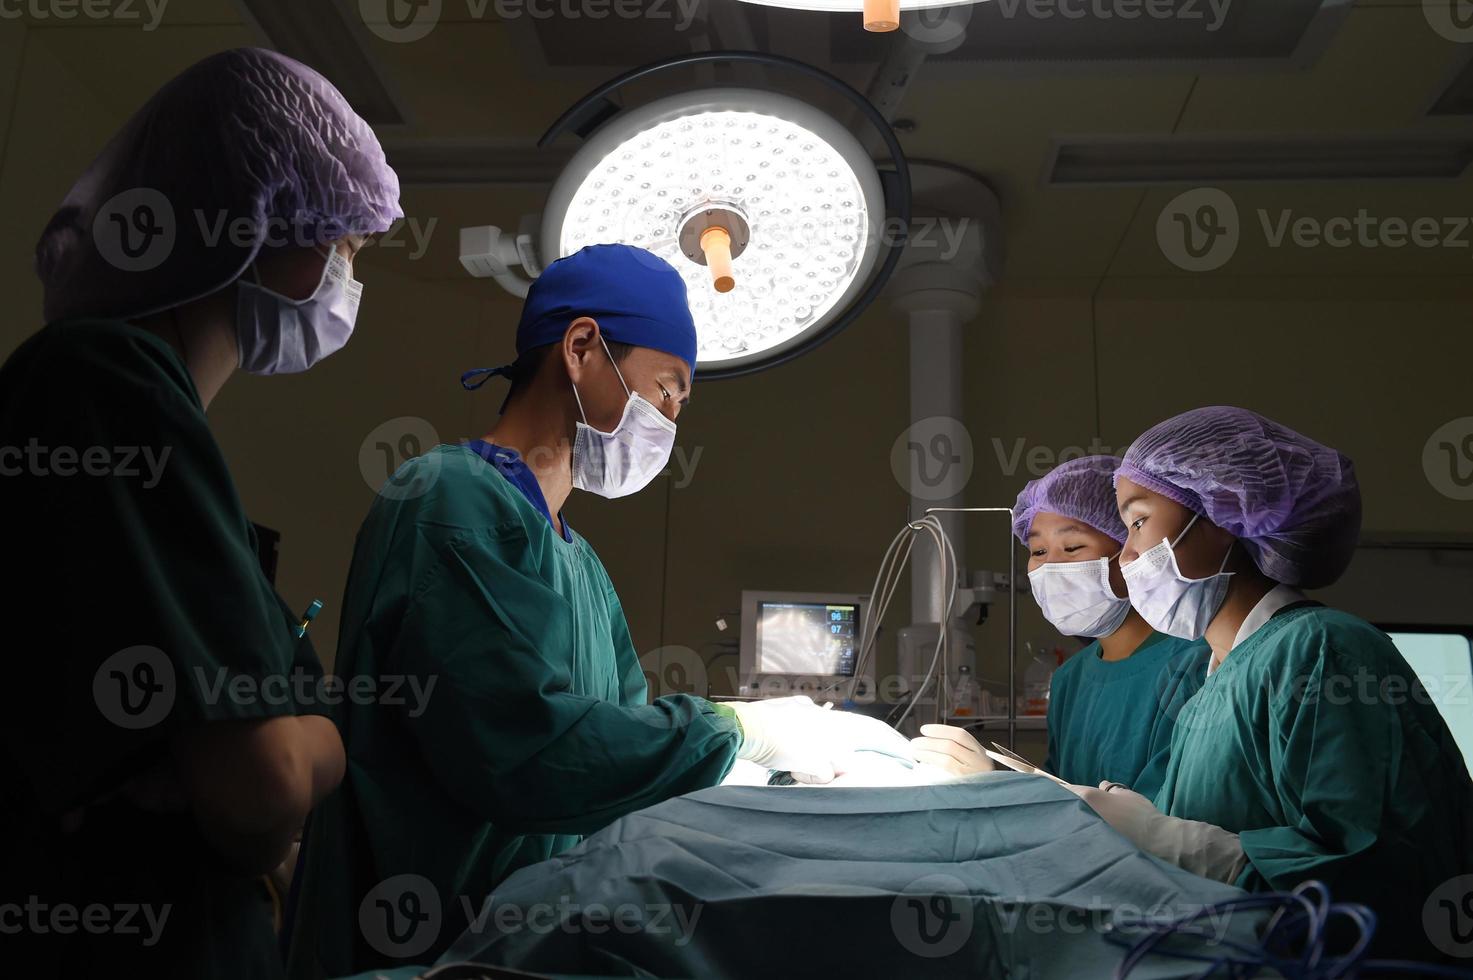 group of veterinarian surgery in operation room photo